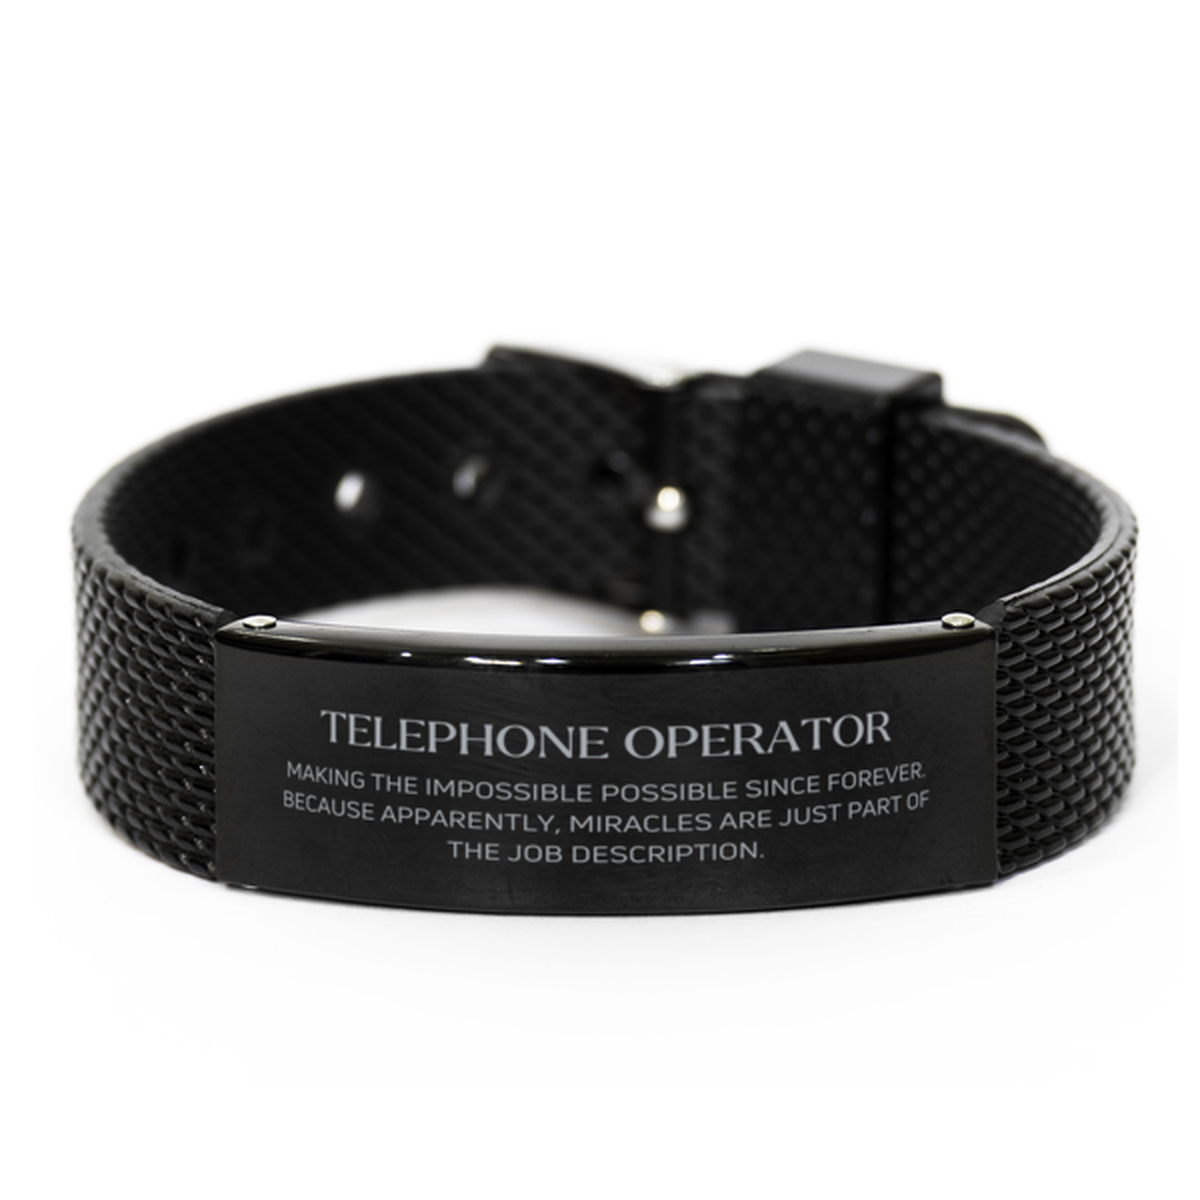 Funny Telephone Operator Gifts, Miracles are just part of the job description, Inspirational Birthday Black Shark Mesh Bracelet For Telephone Operator, Men, Women, Coworkers, Friends, Boss